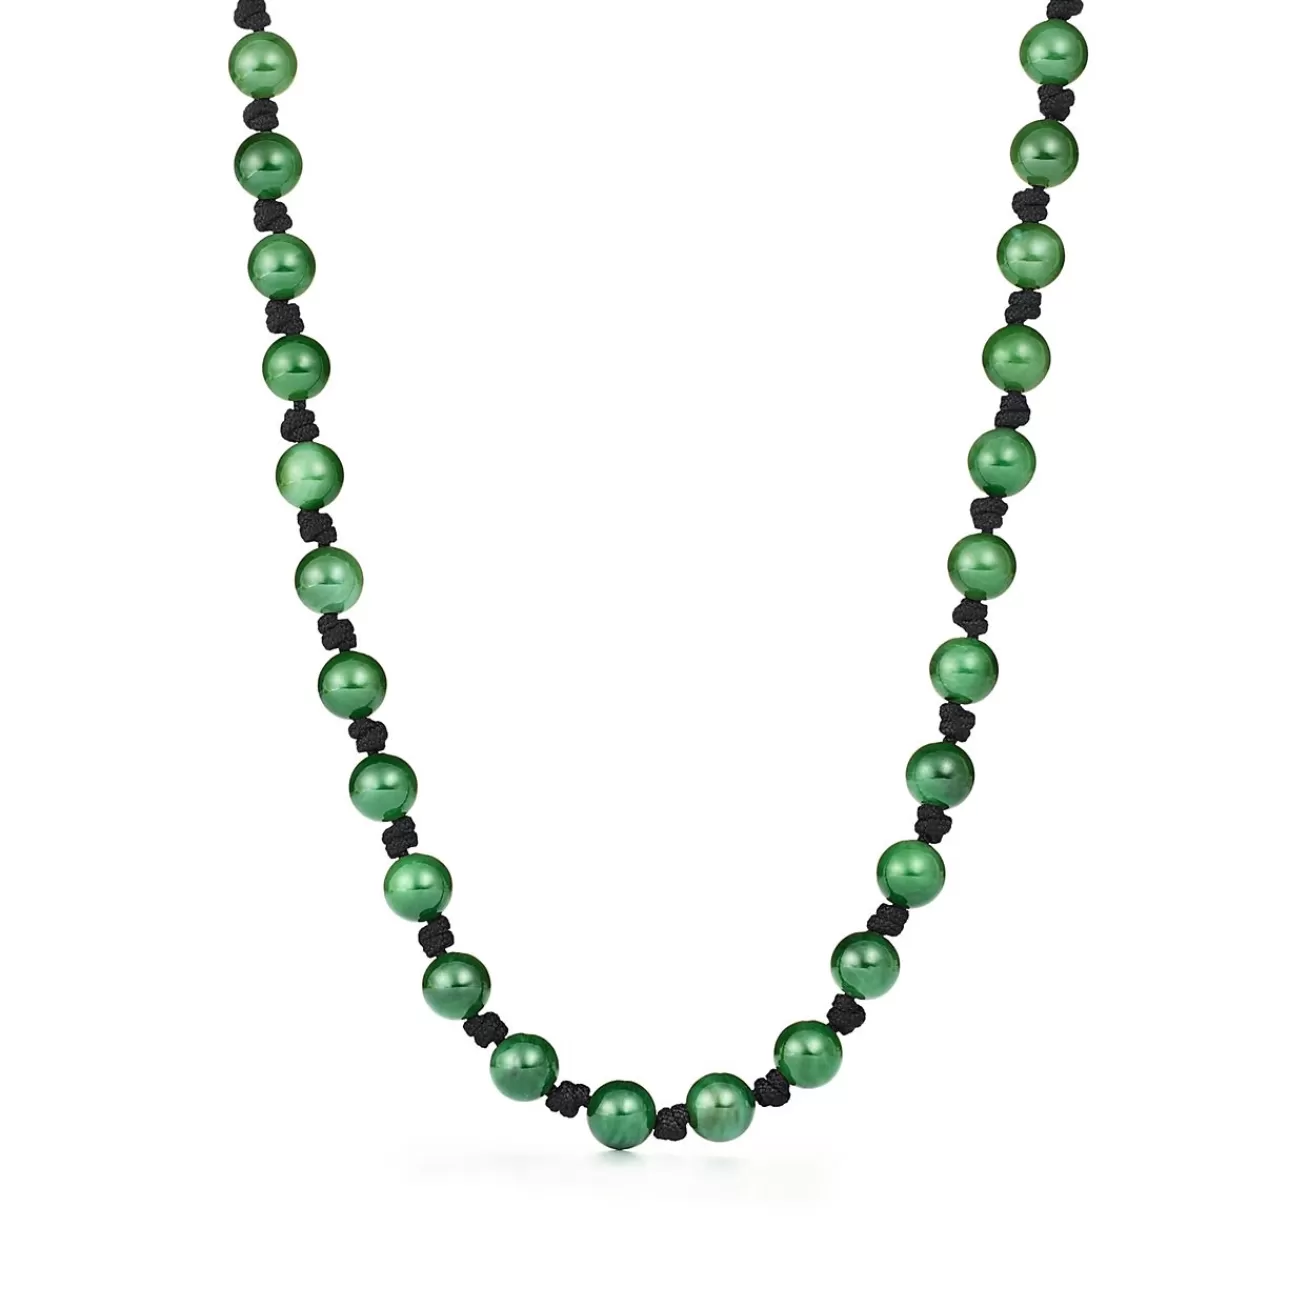 Tiffany & Co. Elsa Peretti® Sphere necklace in green jade. | ^ Necklaces & Pendants | Colored Gemstone Jewelry